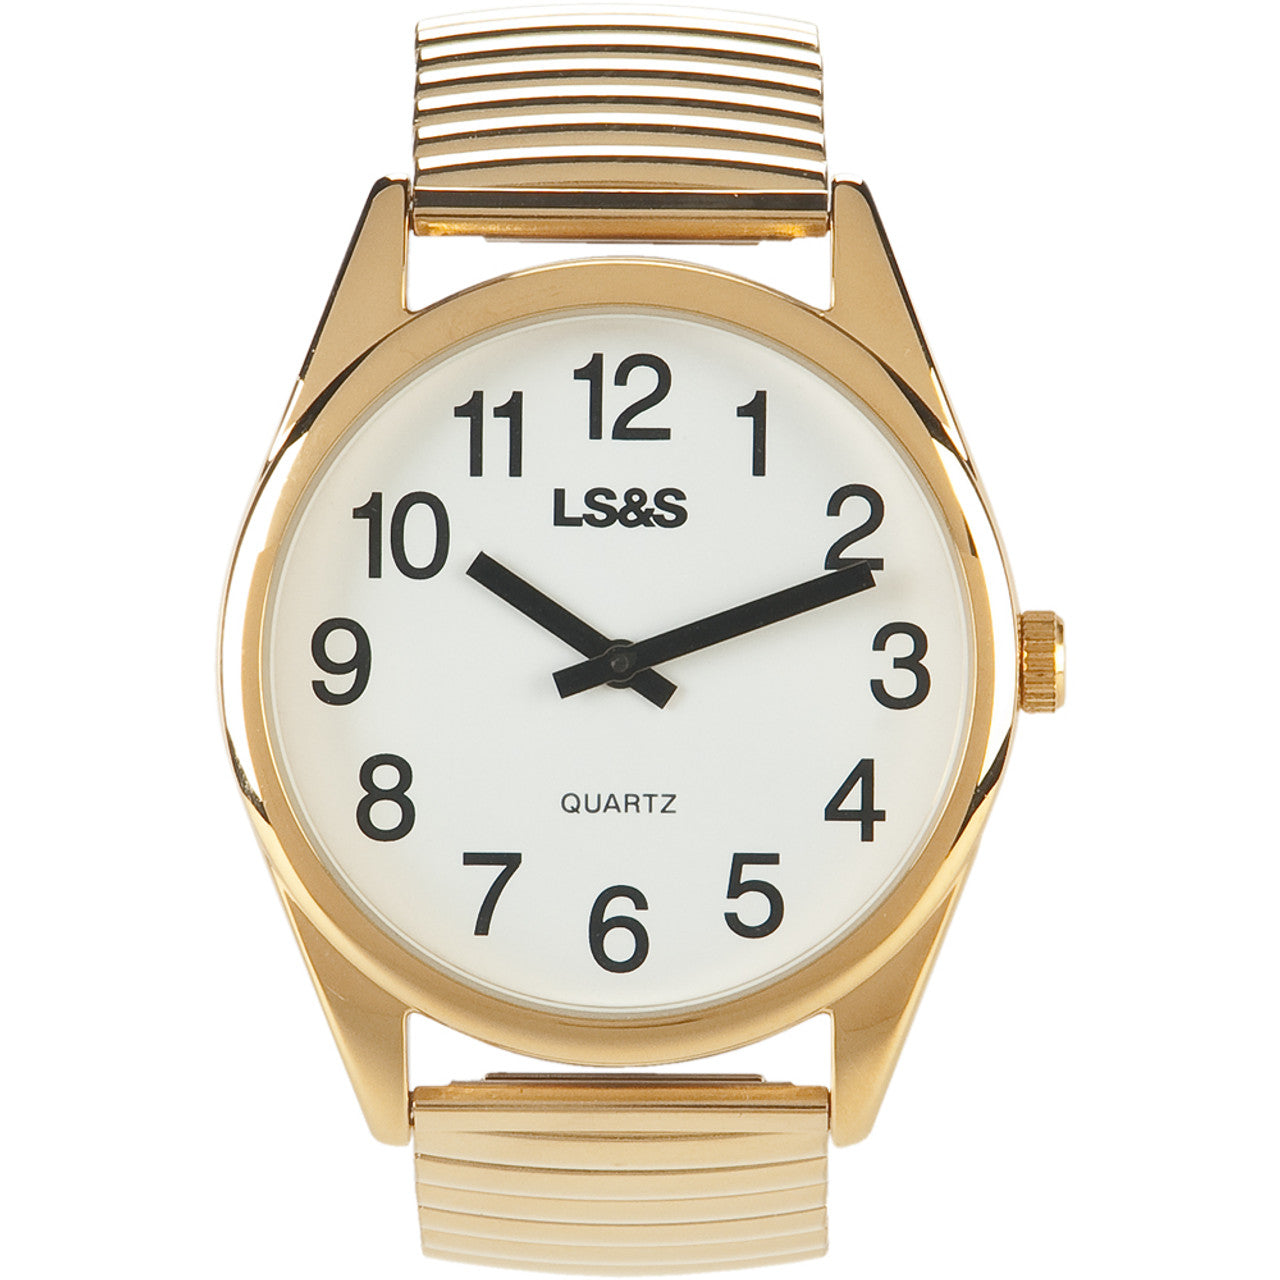 Low Vision Gold Watch with large numbers, white background and black hands and numbers.